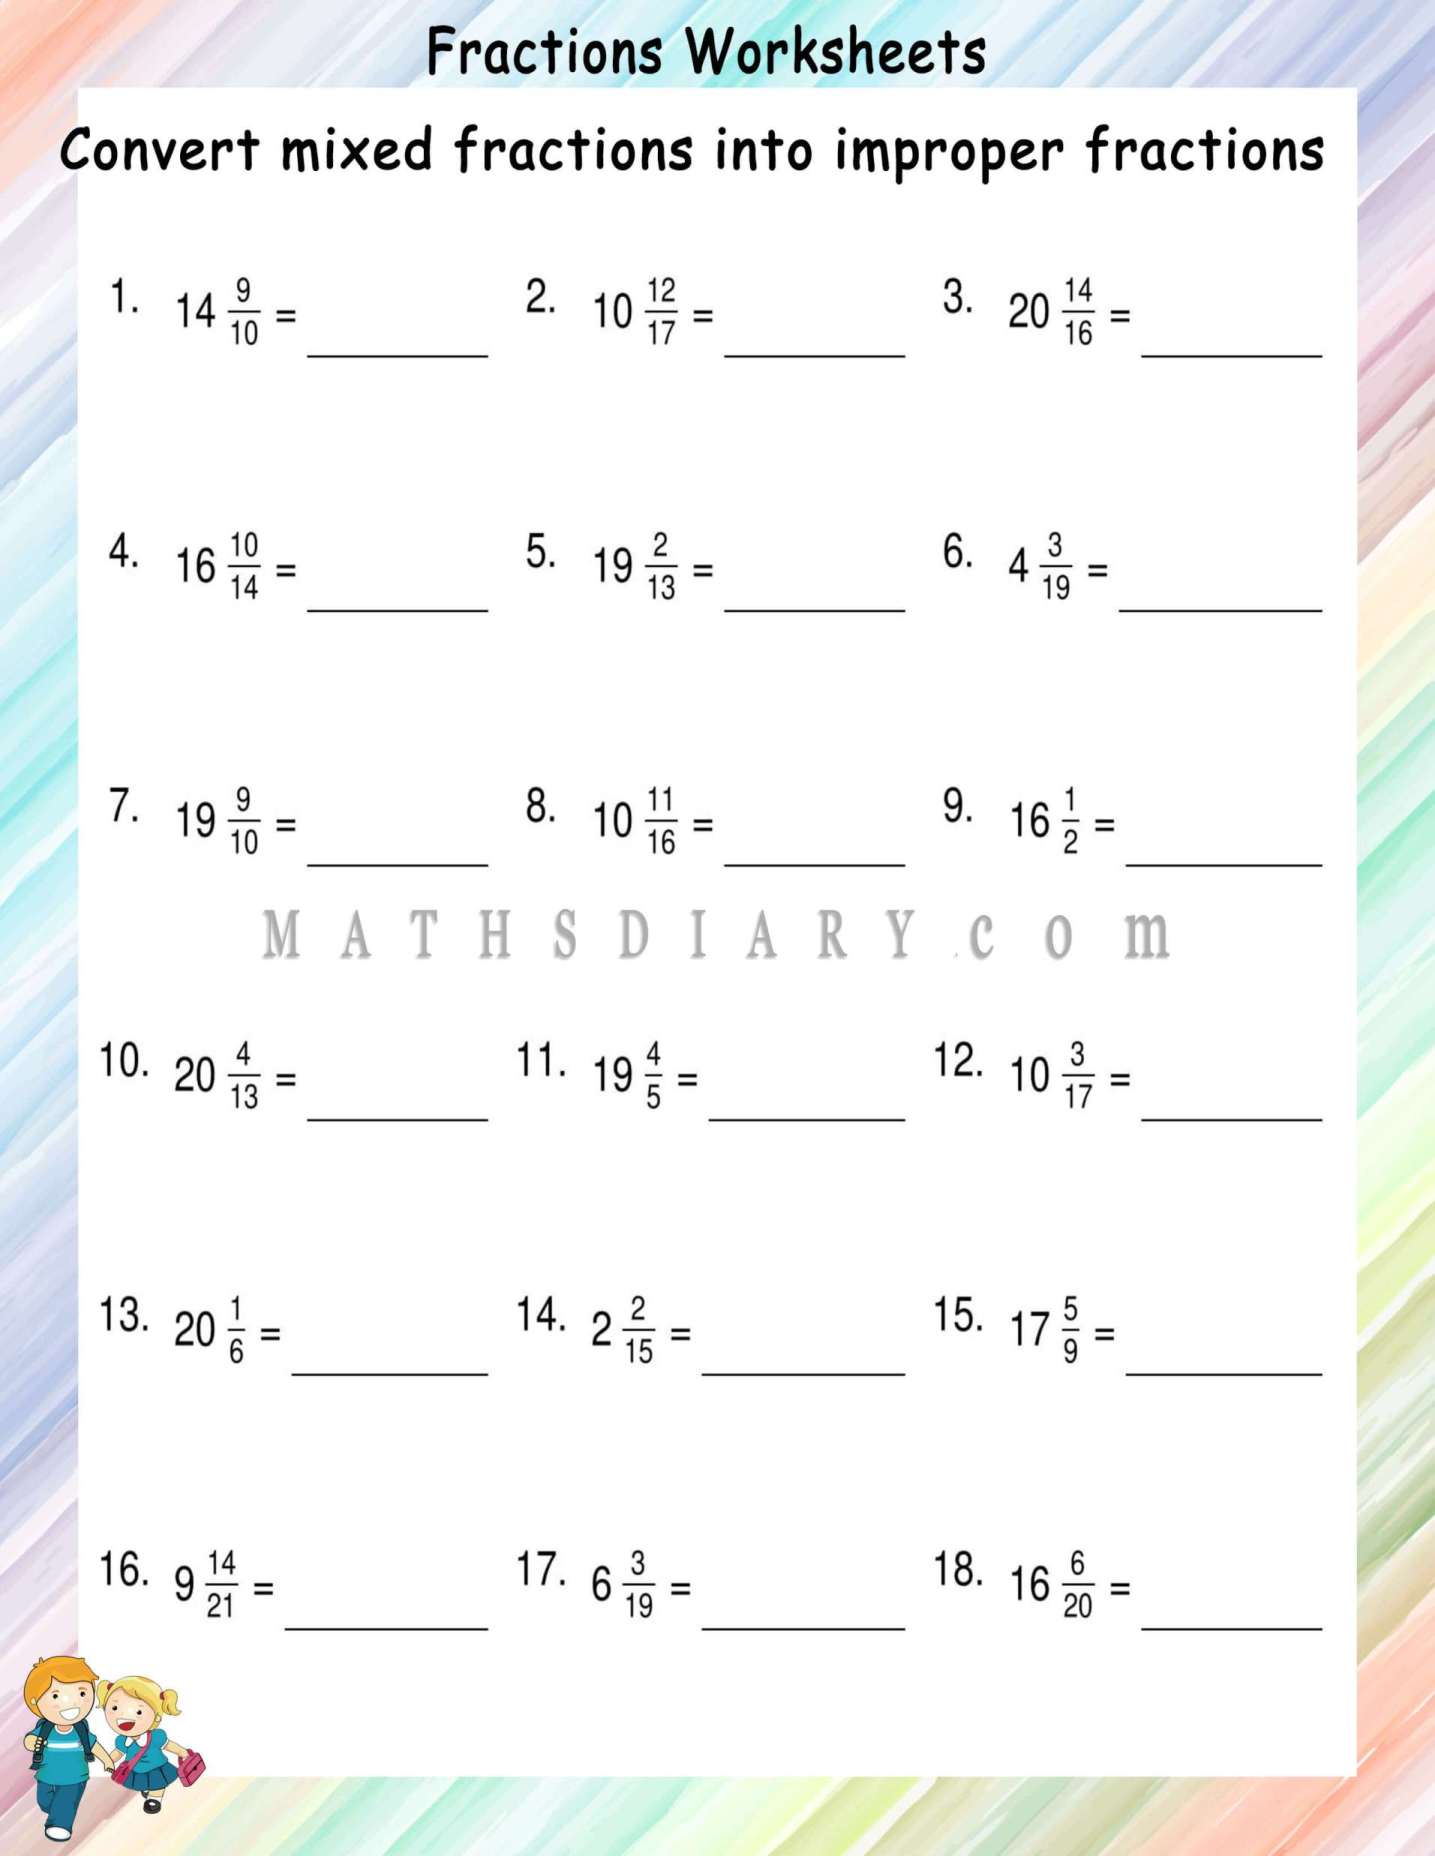 grade-5-math-worksheet-fractions-convert-mixed-numbers-to-improper-fractions-k5-learning